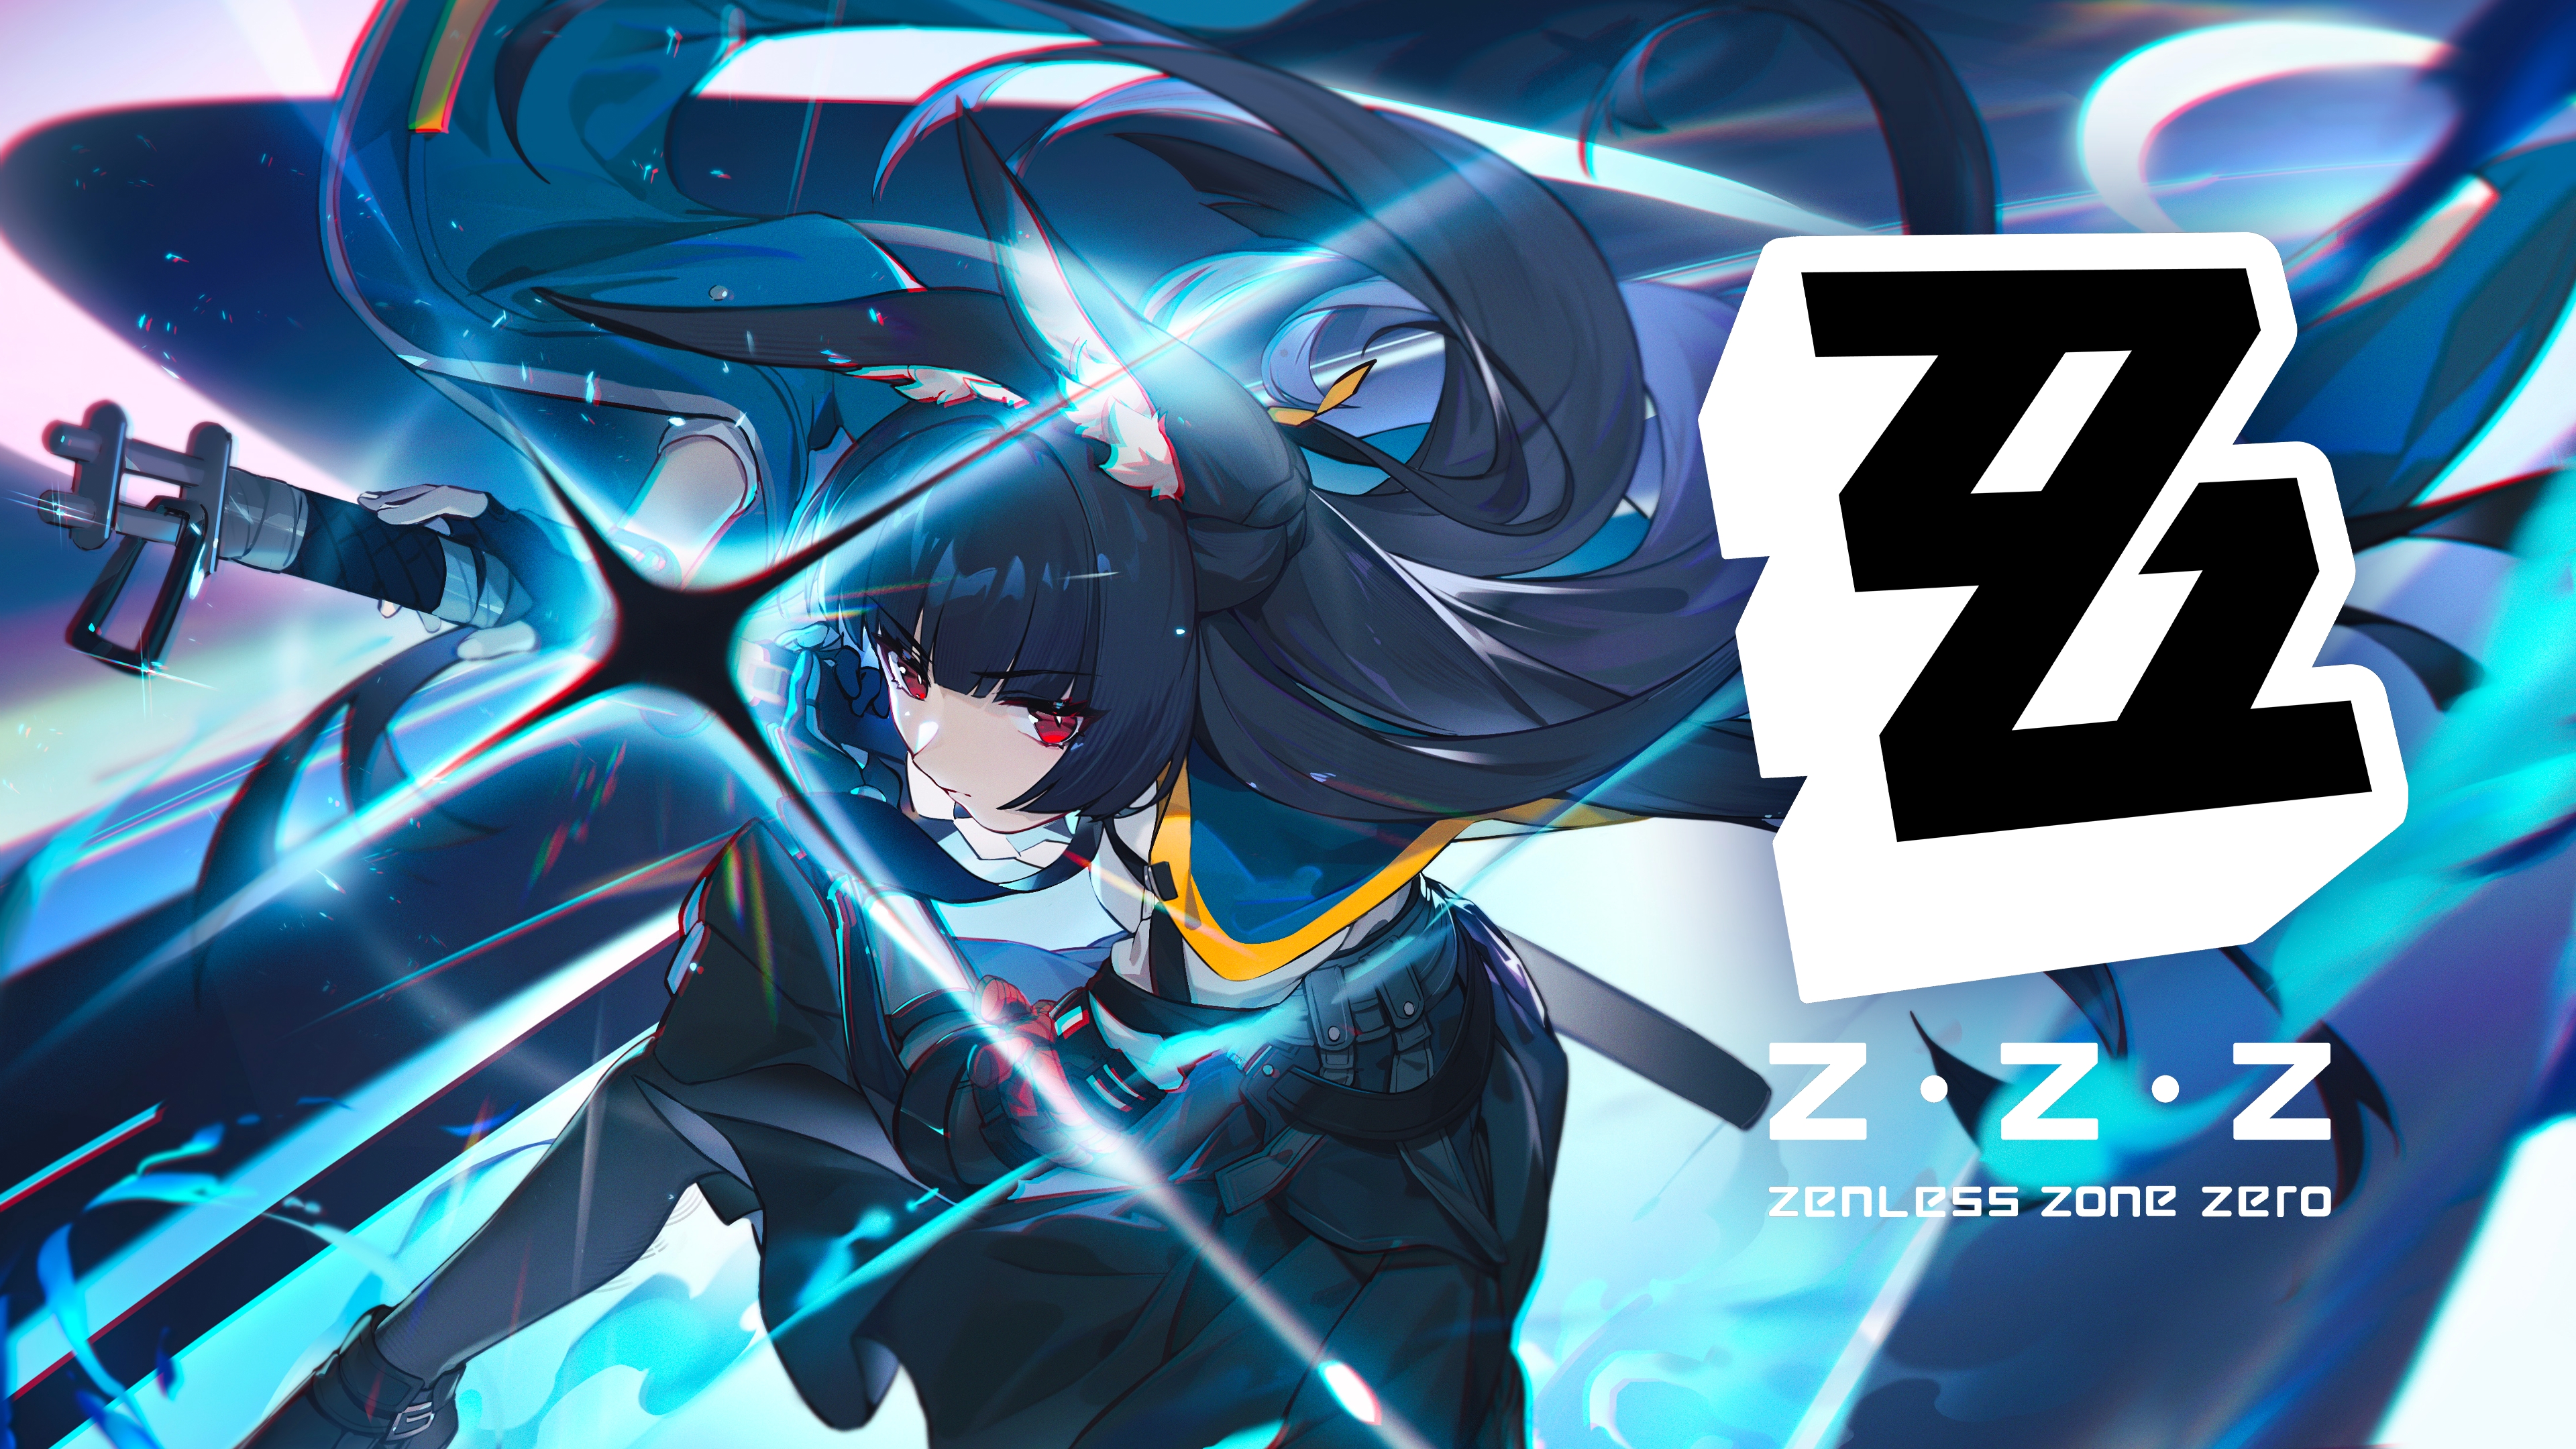 This is Zenless Zone Zero, the next release from the creators of